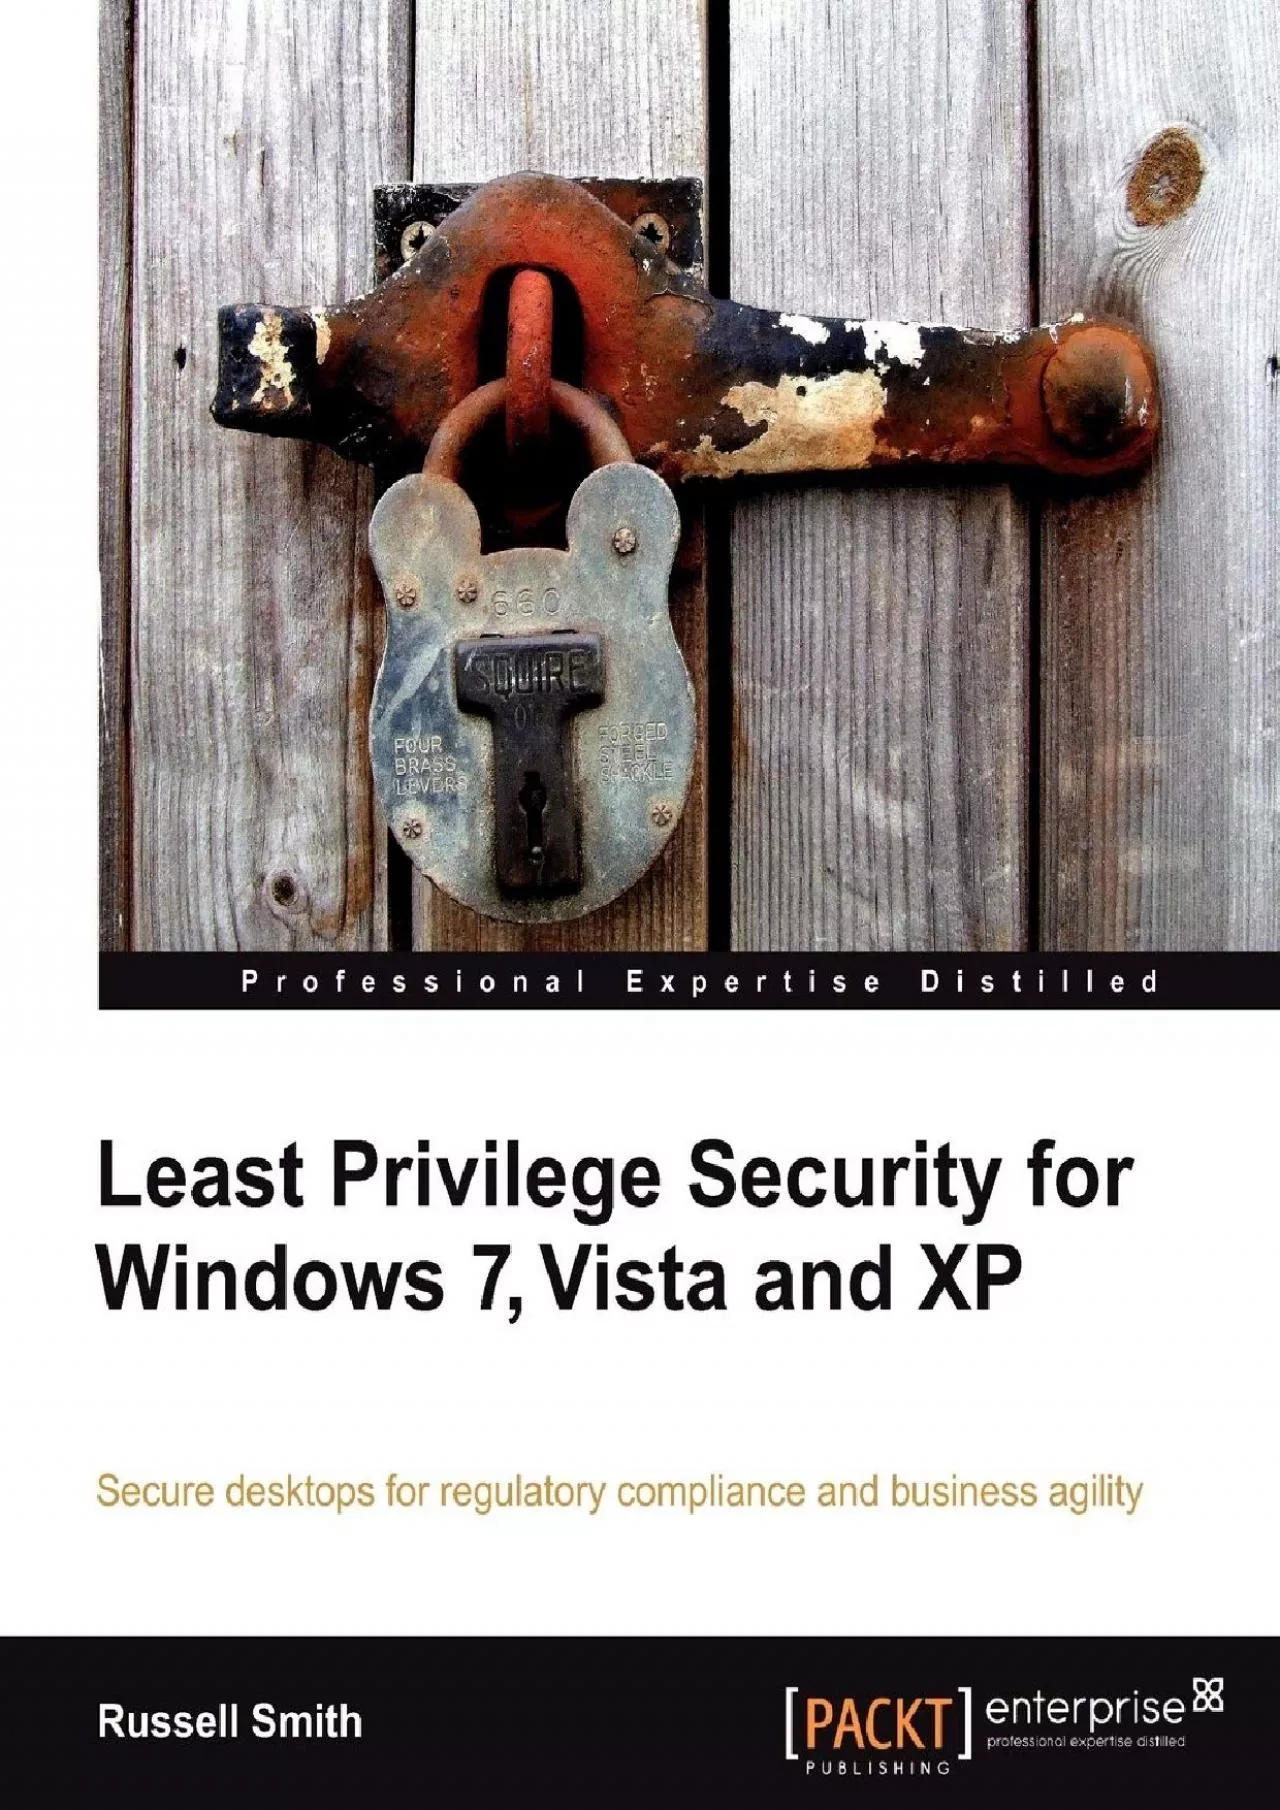 [FREE]-Least Privilege Security for Windows 7, Vista, and XP